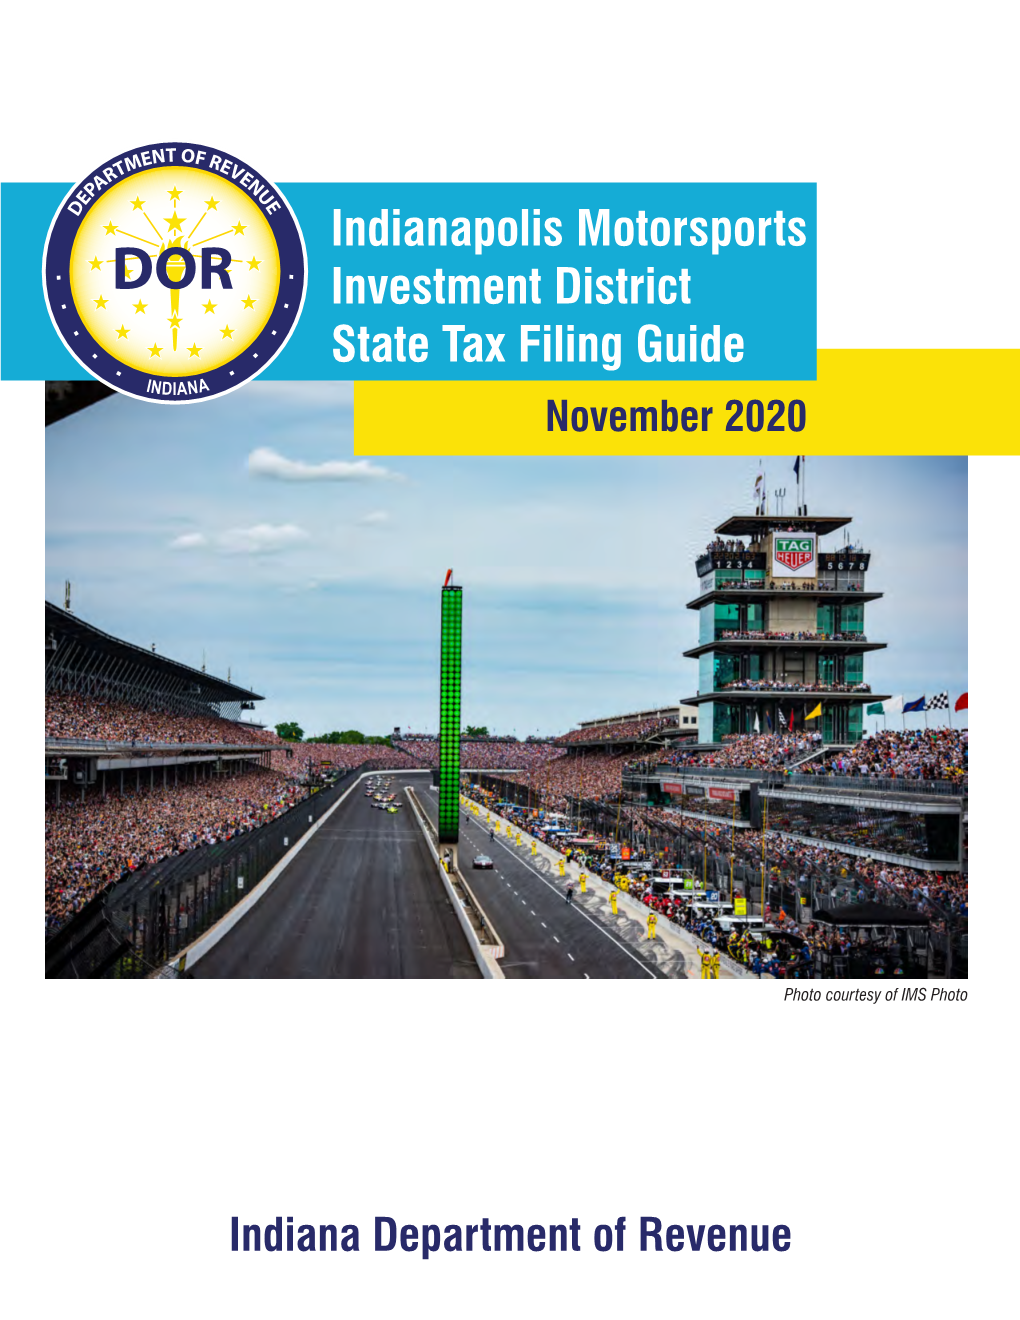 Indianapolis Motorsports Investment District State Tax Filing Guide November 2020